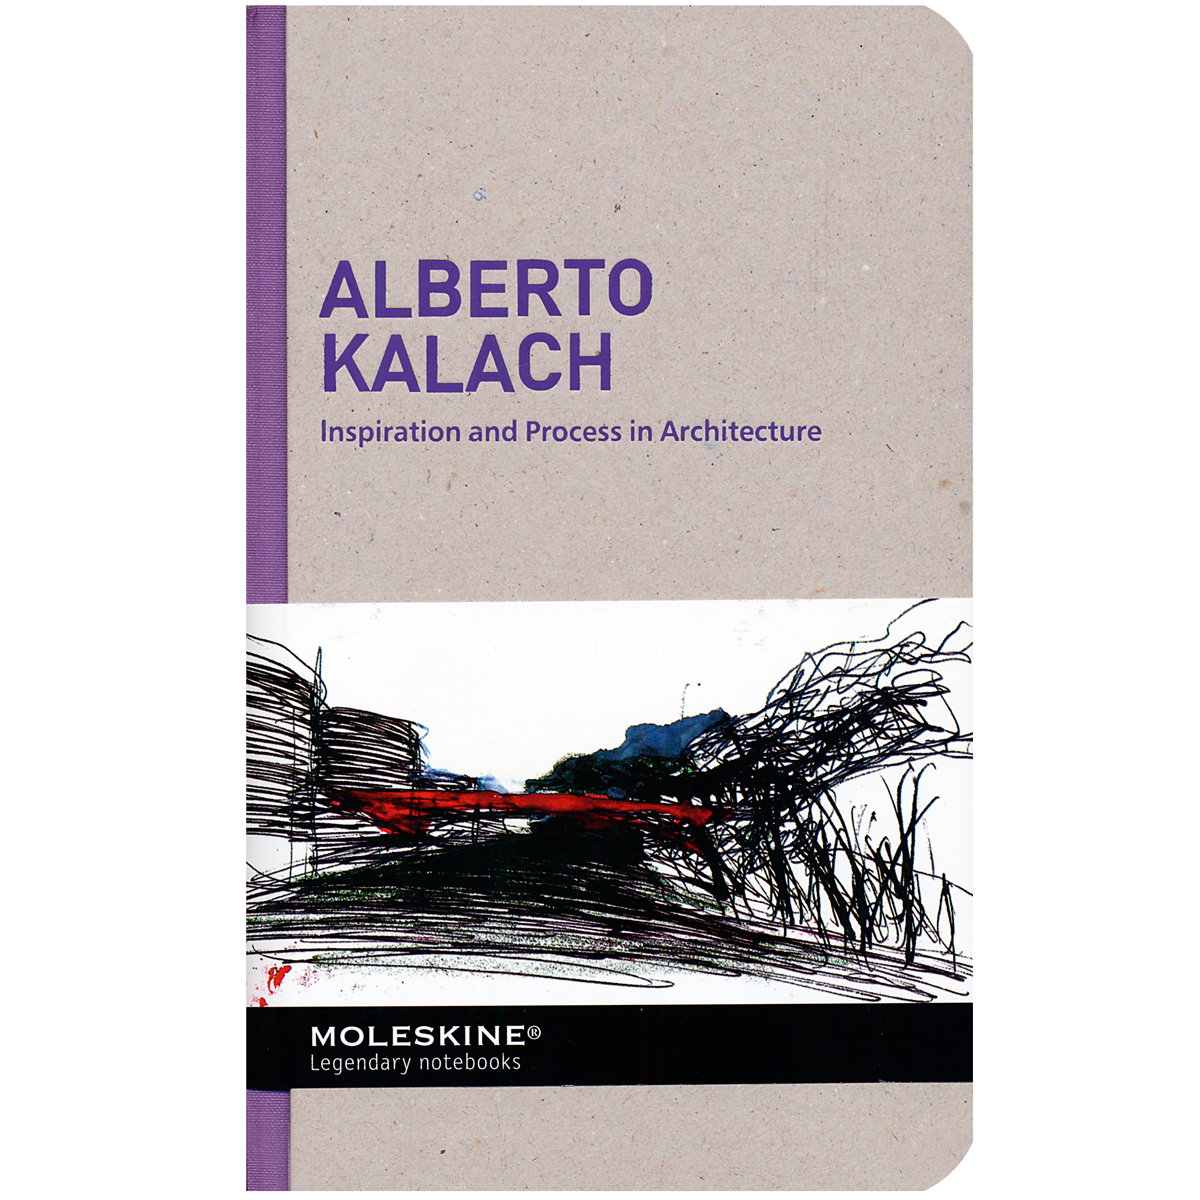 Inspiration and Process in Architecture: Alberto Kalach